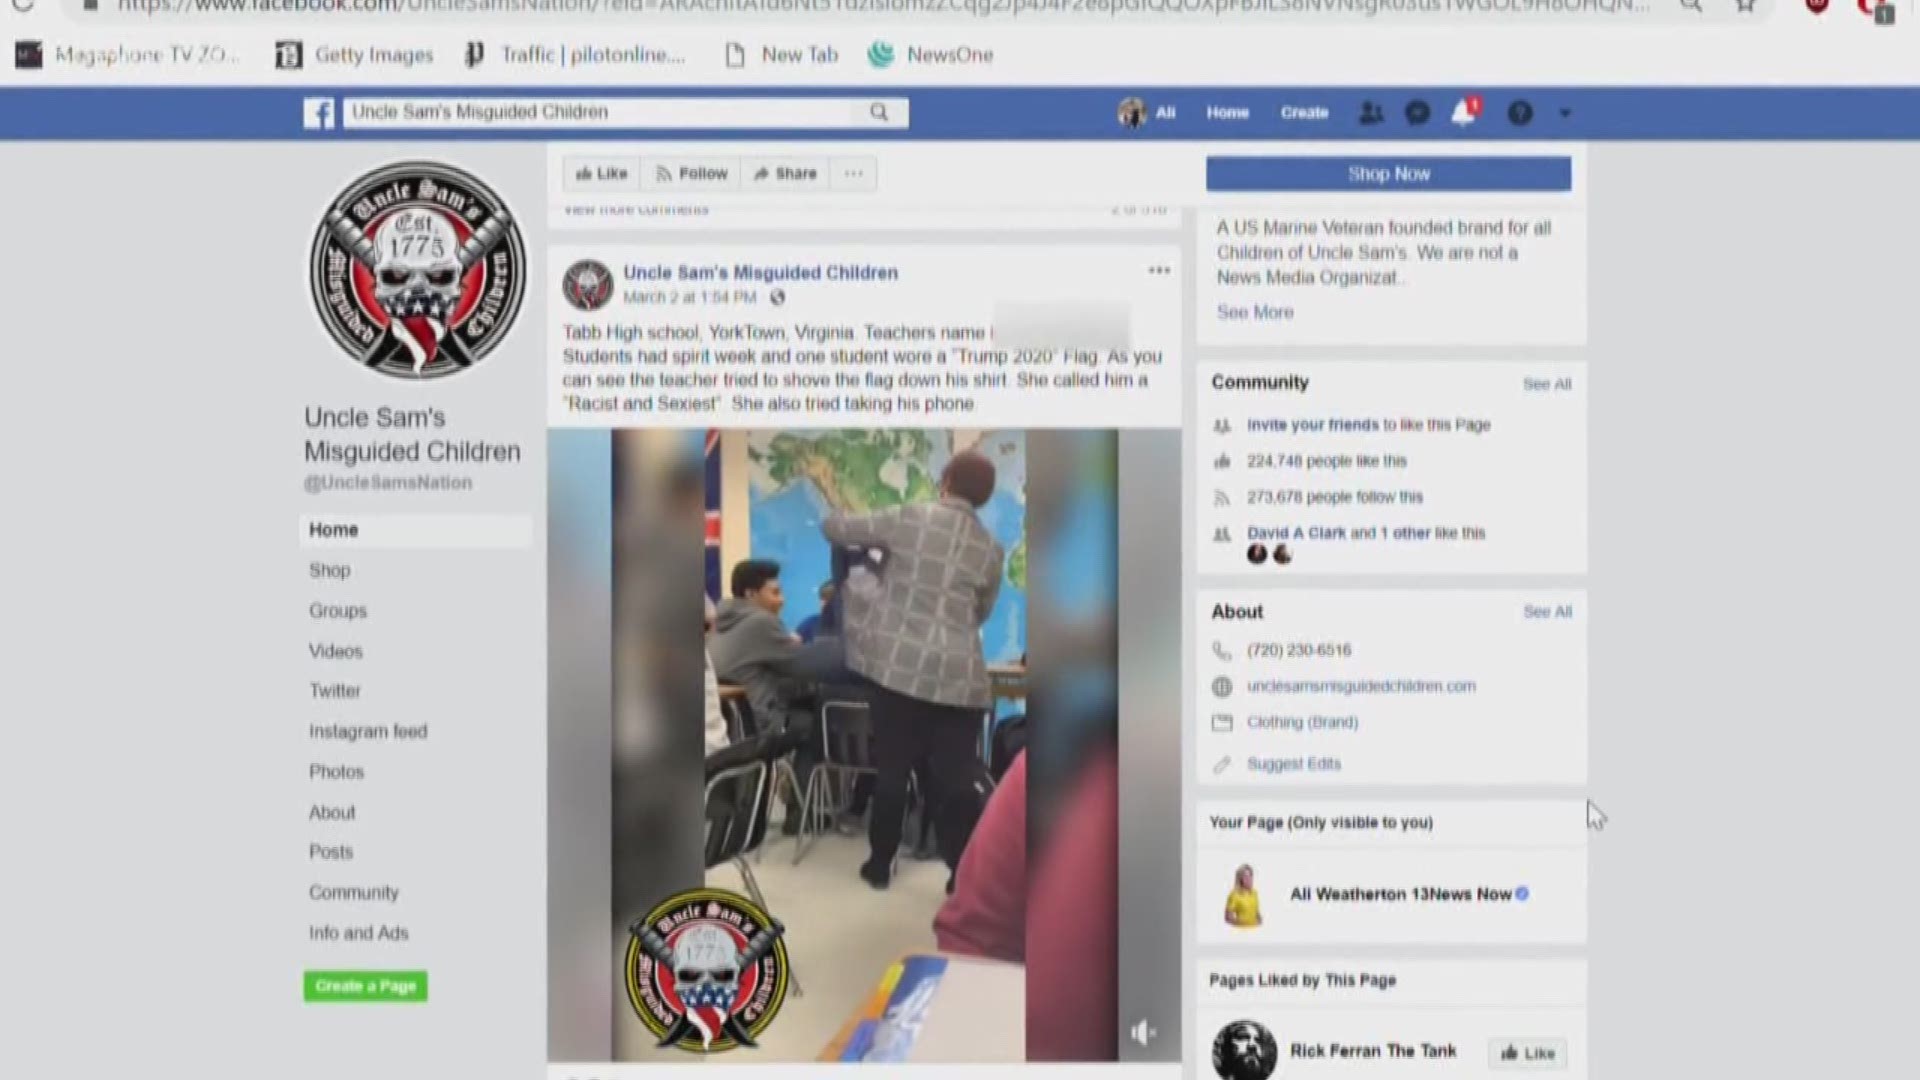 According to the York County School Division, the woman in the video is a teacher's assistant. They are investigating after the video showed her wrapping a Trump 2020 flag around a student's neck.